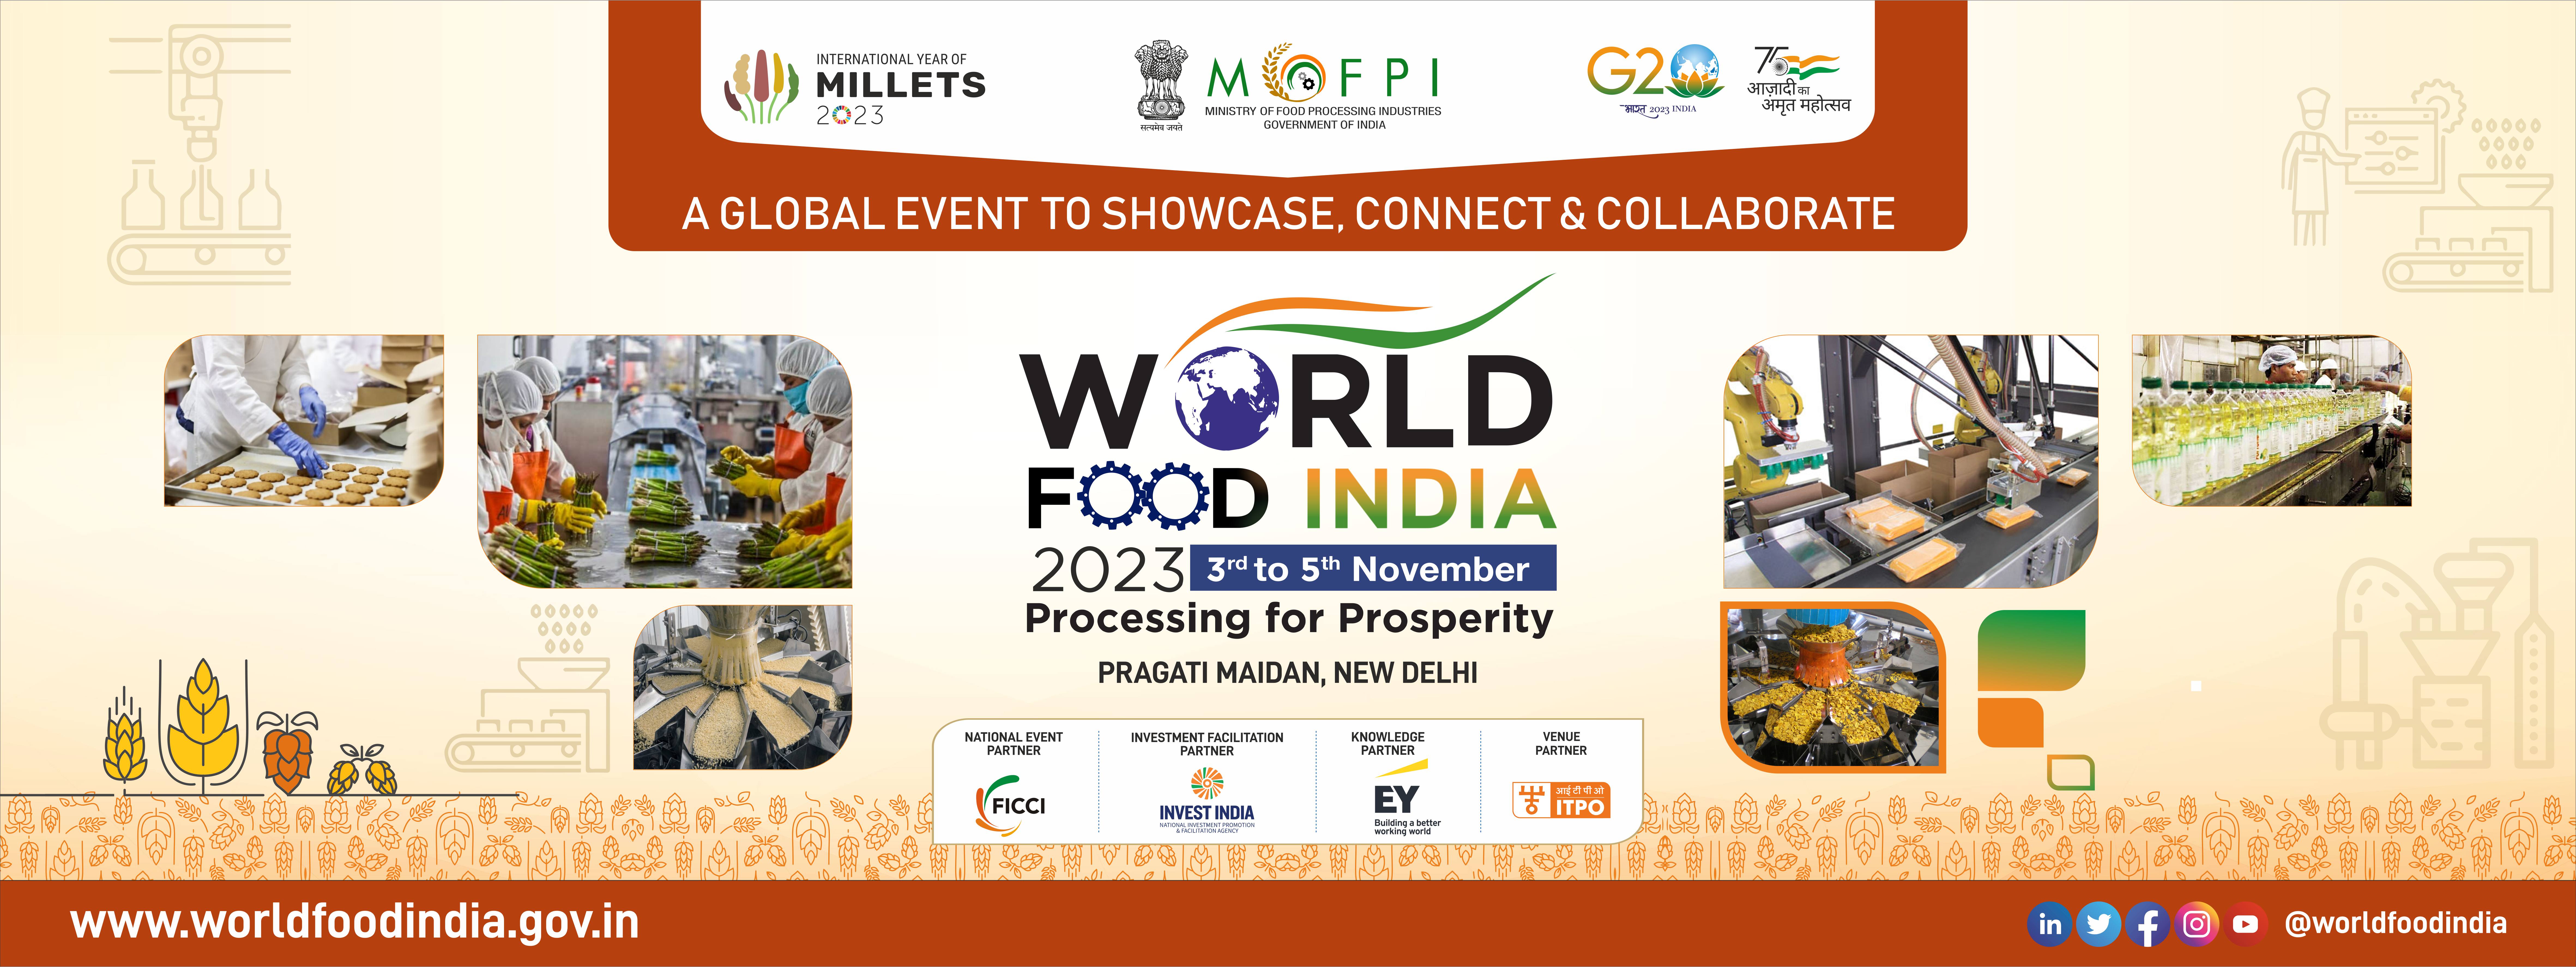 Please click here to visit the World Food India 2023 portal